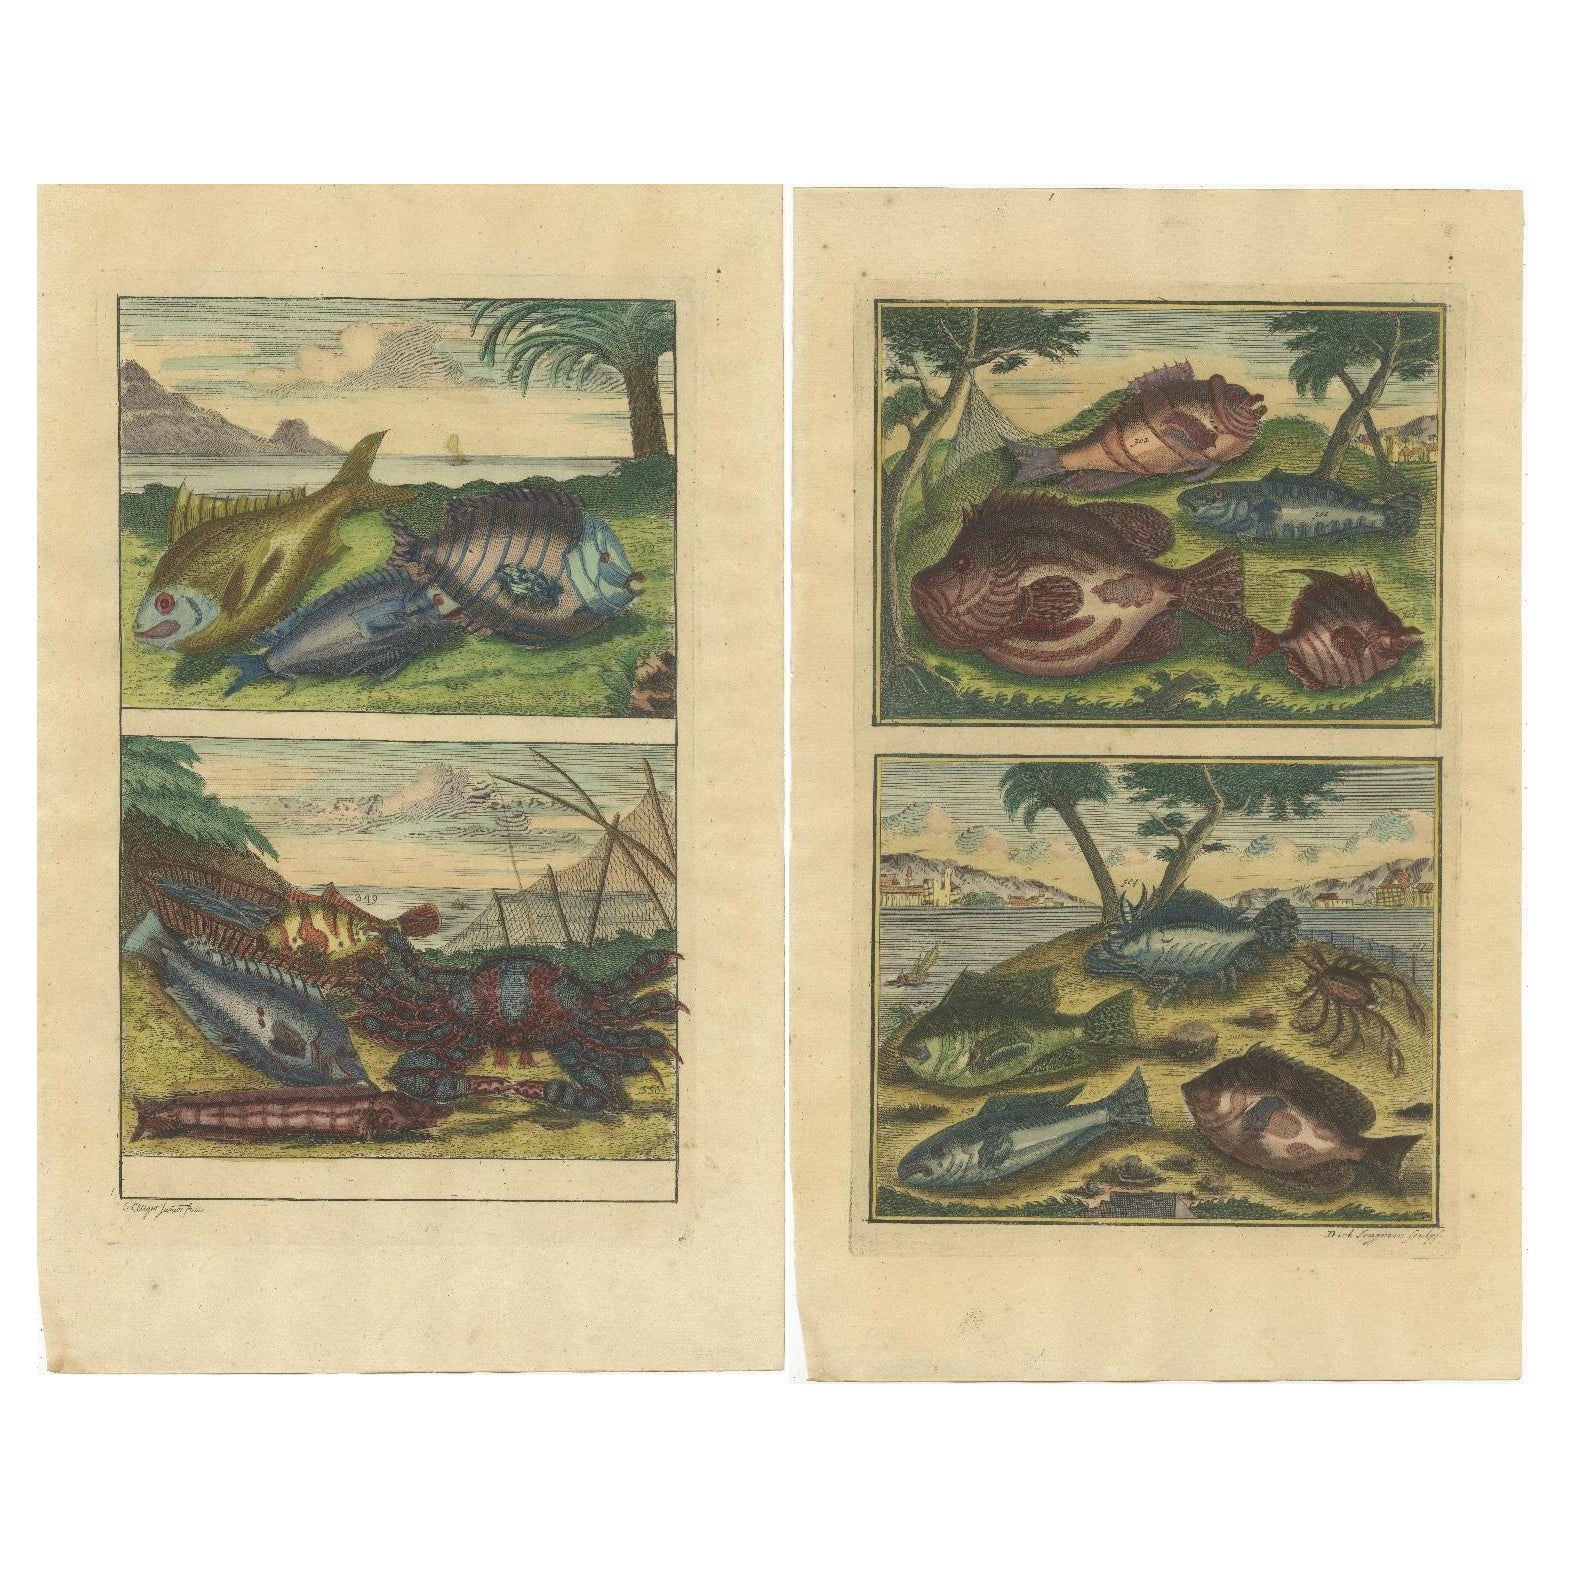 Set of 2 Colored Antique Prints of Various Fishes and Crustaceans